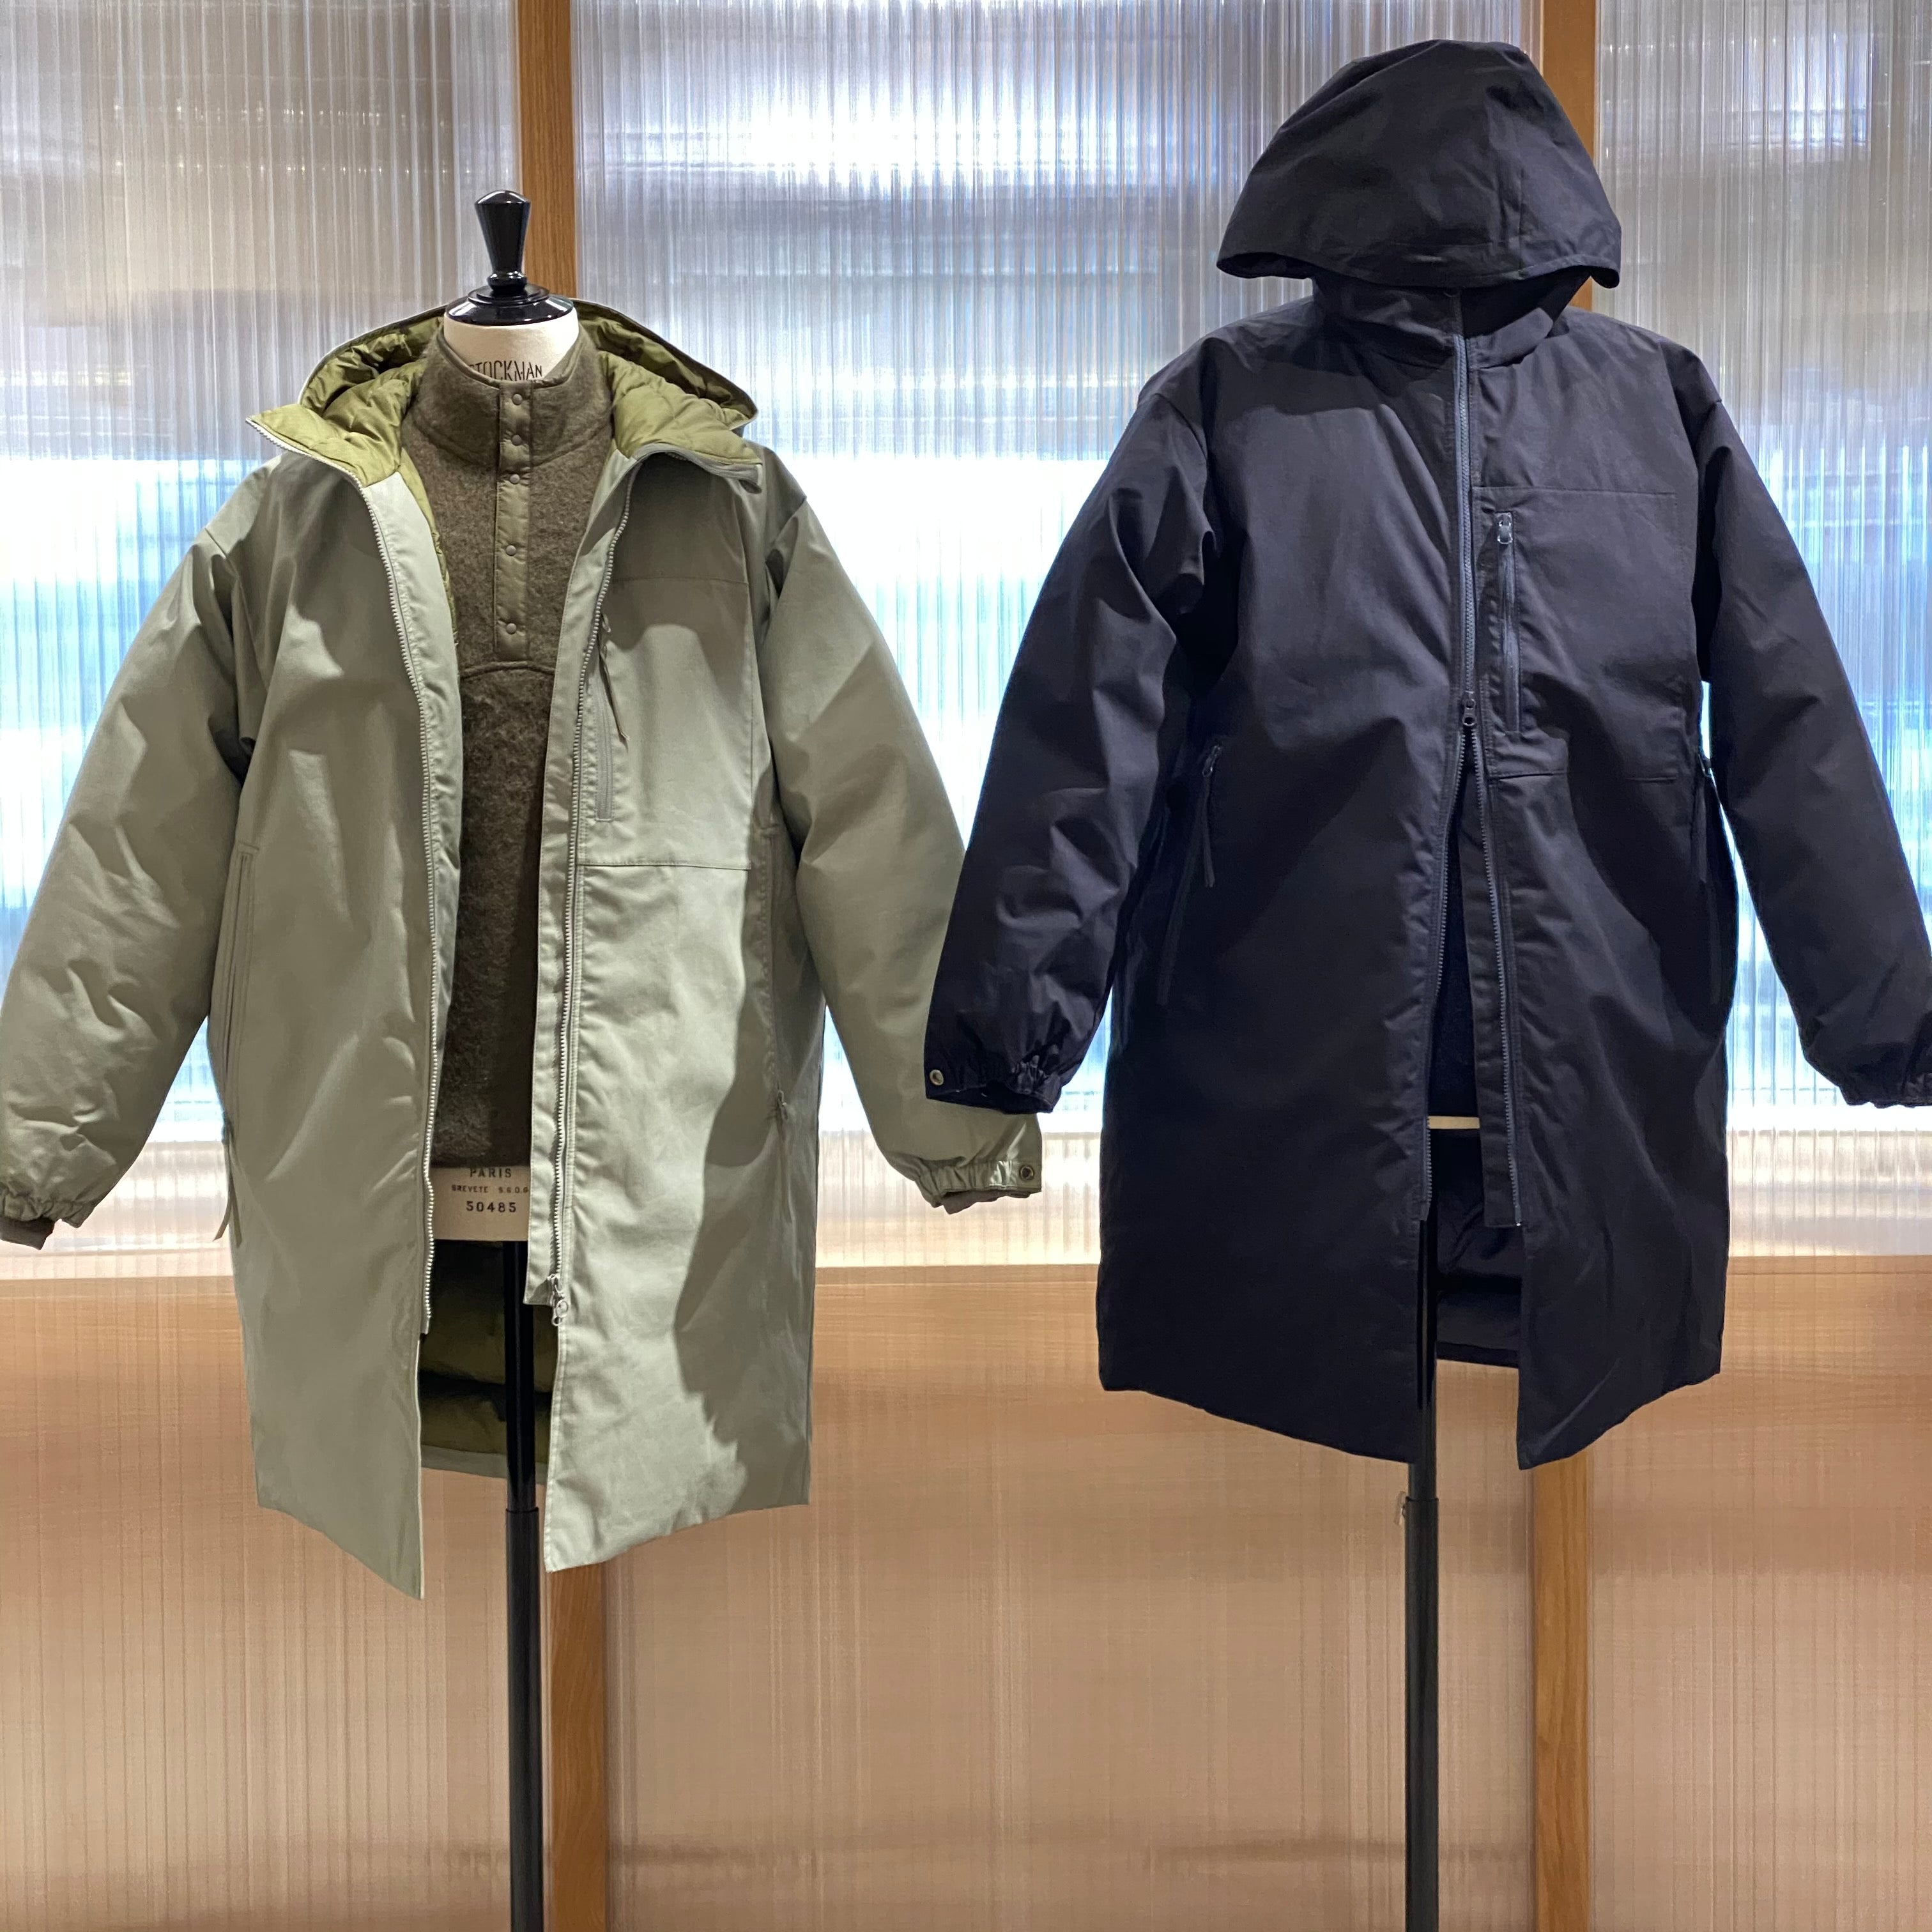 Winter Collection Down Coat and Jacket – nanamica NEW YORK